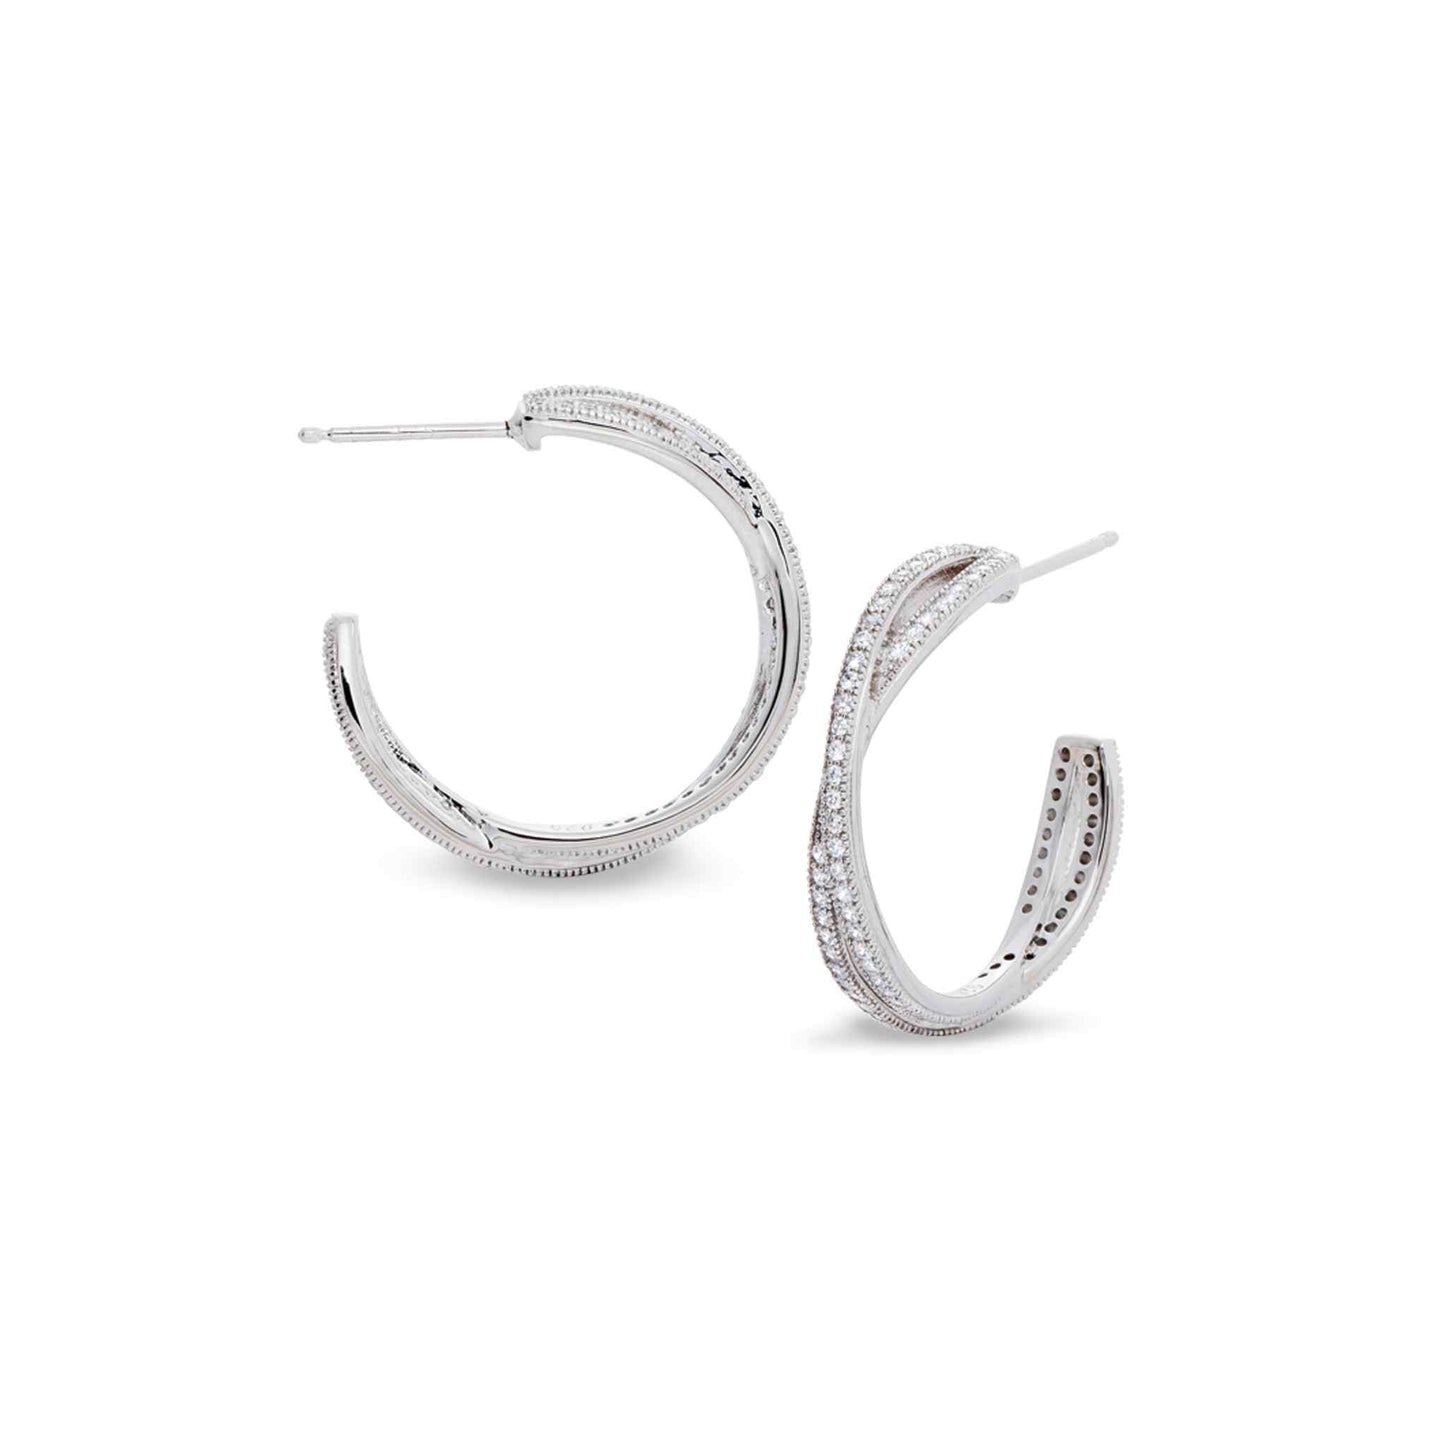 A twisted hoop earrings with simulated diamonds displayed on a neutral white background.